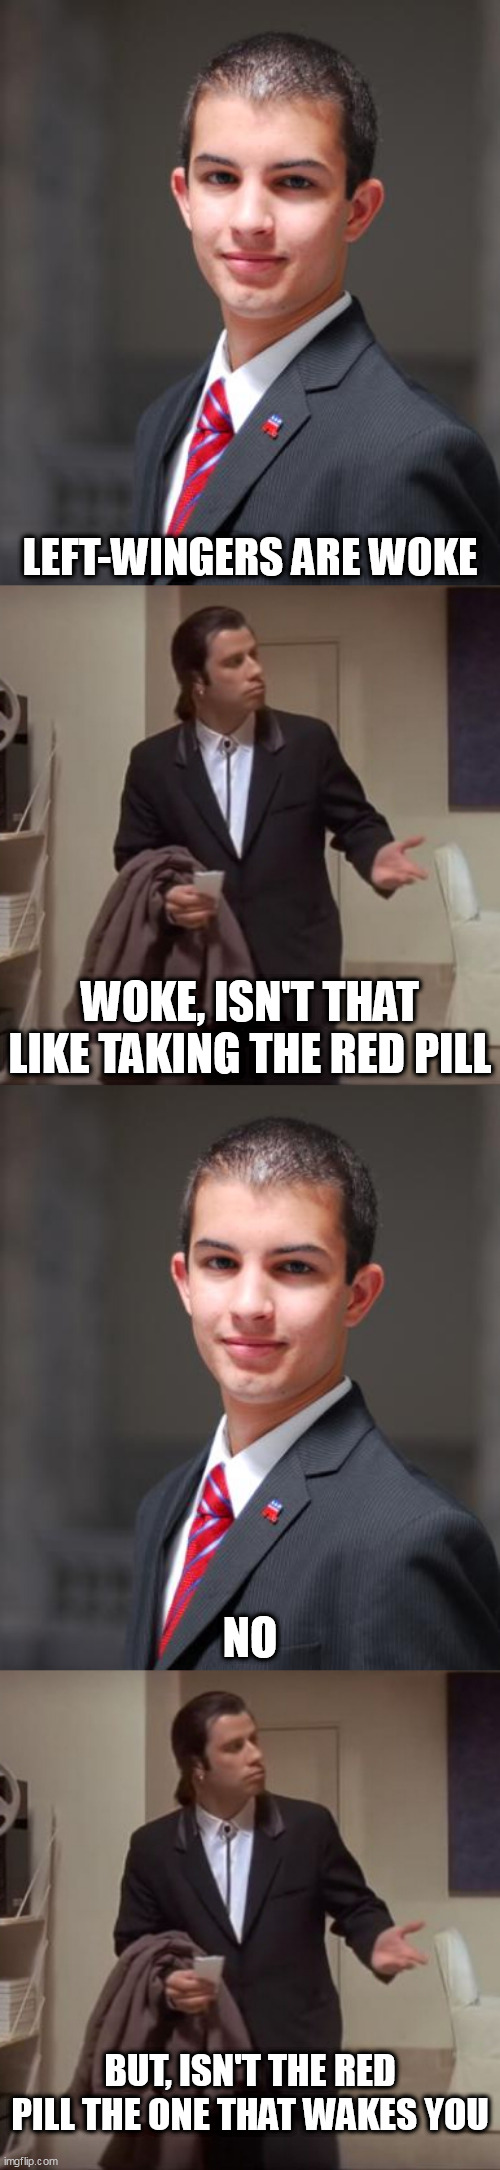 Woke | LEFT-WINGERS ARE WOKE; WOKE, ISN'T THAT LIKE TAKING THE RED PILL; NO; BUT, ISN'T THE RED PILL THE ONE THAT WAKES YOU | image tagged in college conservative,confused travolta,woke,red pill,red-pill,left | made w/ Imgflip meme maker